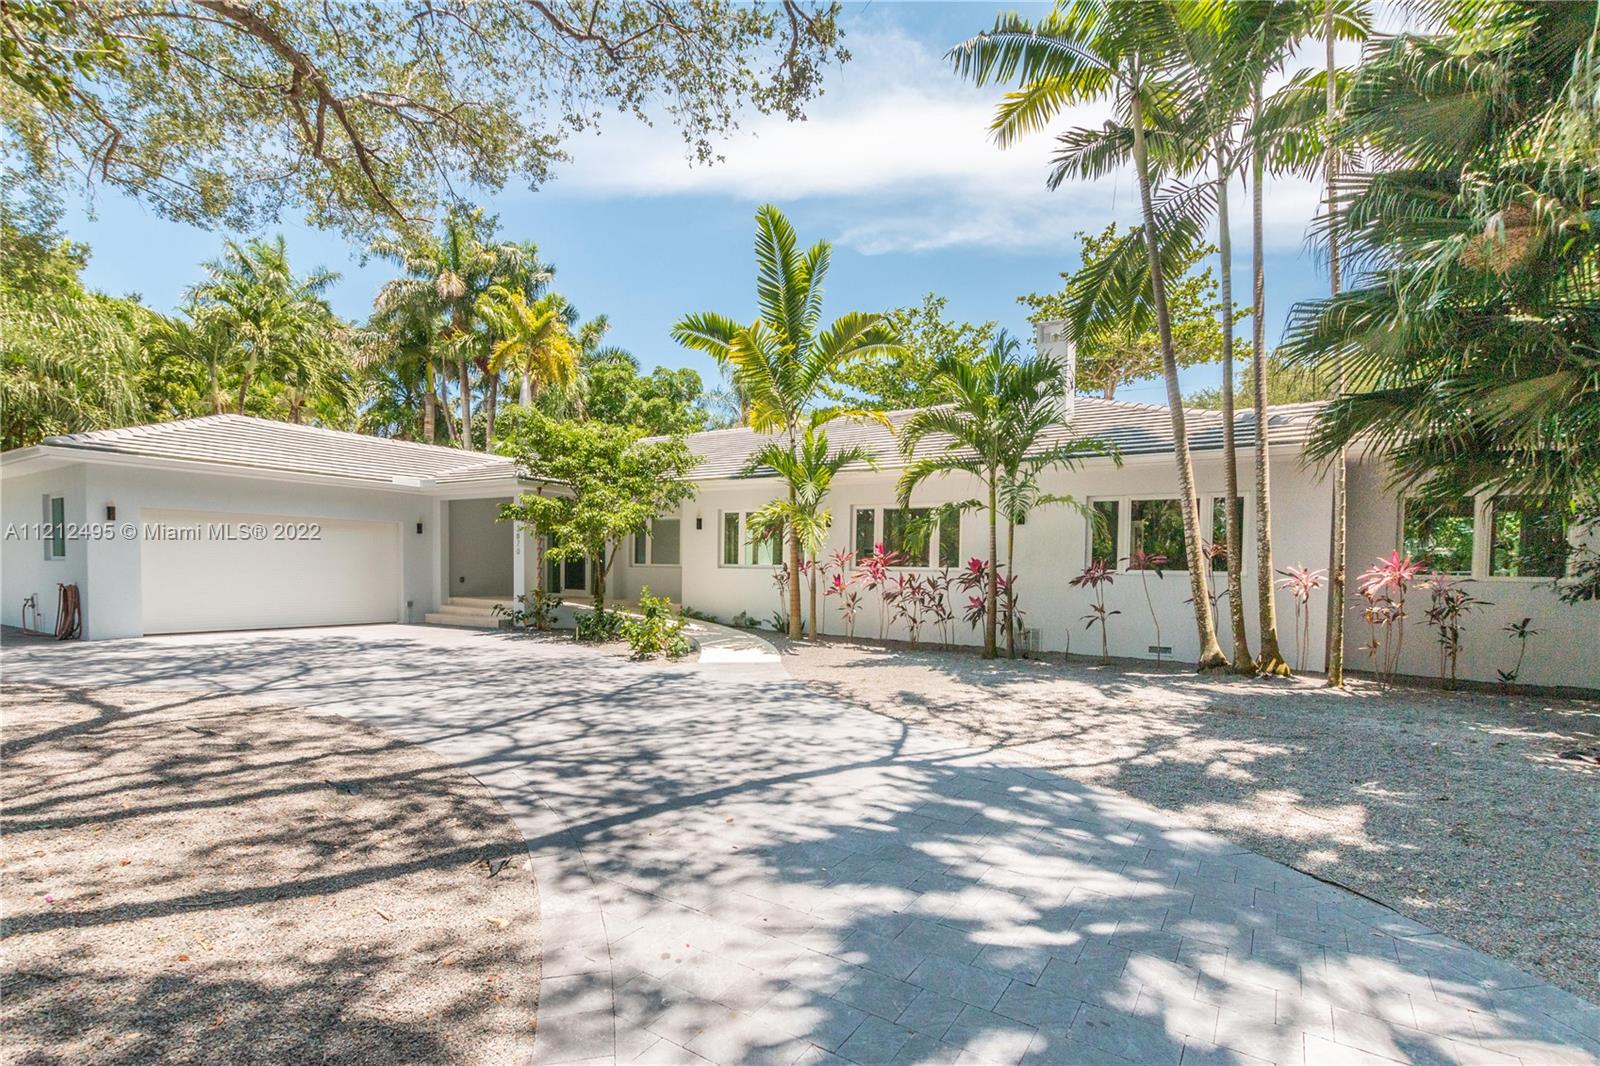 Completely renovated home on oversized lot on a private cul-de-sac, Oak canopied and sought after Leafy Way.  Located in prestigious South Coconut Grove. Residences plumbing, electrical, mechanical, roofing, impact windows and doors, flooring, appliances, kitchen and bathrooms, audio wiring and saltwater pool completed in 2014. Main house has a split floorplan with oversized grand bedroom, bath and closet space on one side and 3 bedrooms plus den/office on the other end. In addition, there is a separate guest house with full bath and kitchen. 2 car AC’d garage. Fully ADA accessible. Walking distance to the Grove village center’s eateries, shops, Bayfront parks and marinas. New landscaping throughout the grounds.  This home has it all. Bright spacious floor plan with high ceilings.